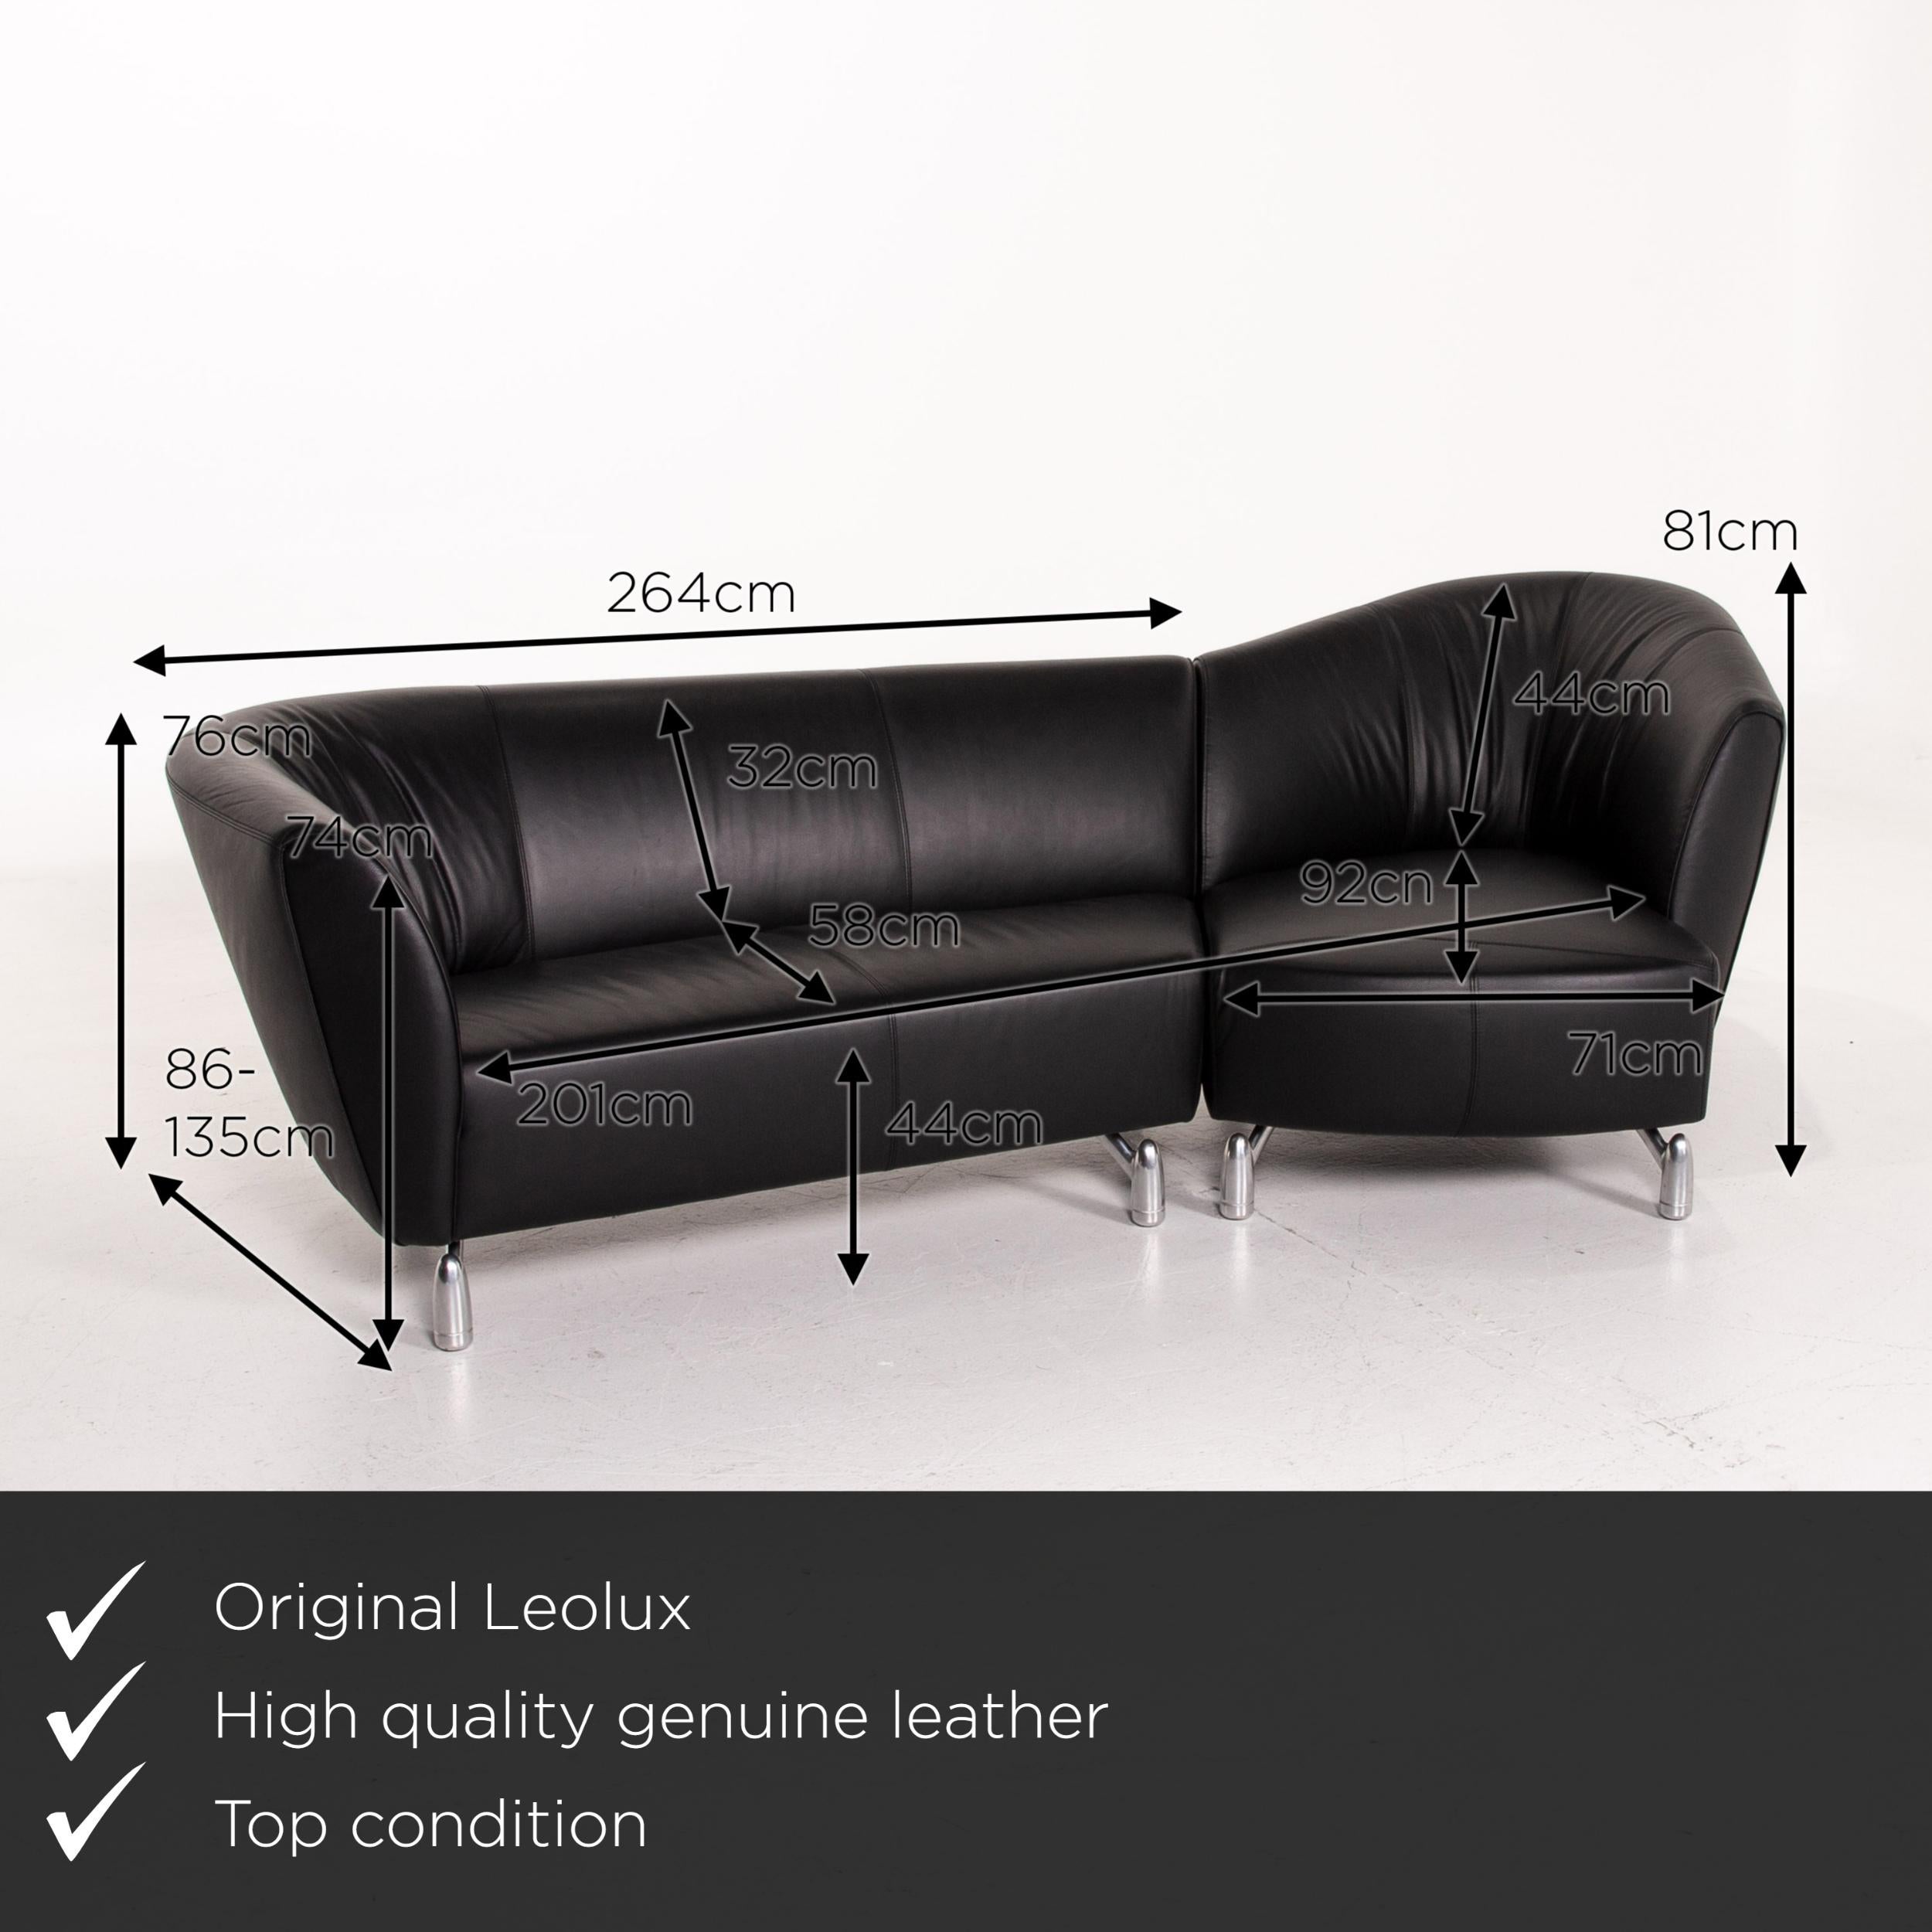 We present to you a Leolux leather corner sofa black sofa couch.
 

 Product measurements in centimeters:
 

Depth 86
Width 264
Height 81
Seat height 44
Rest height 74
Seat depth 58
Seat width 201
Back height 44.
 